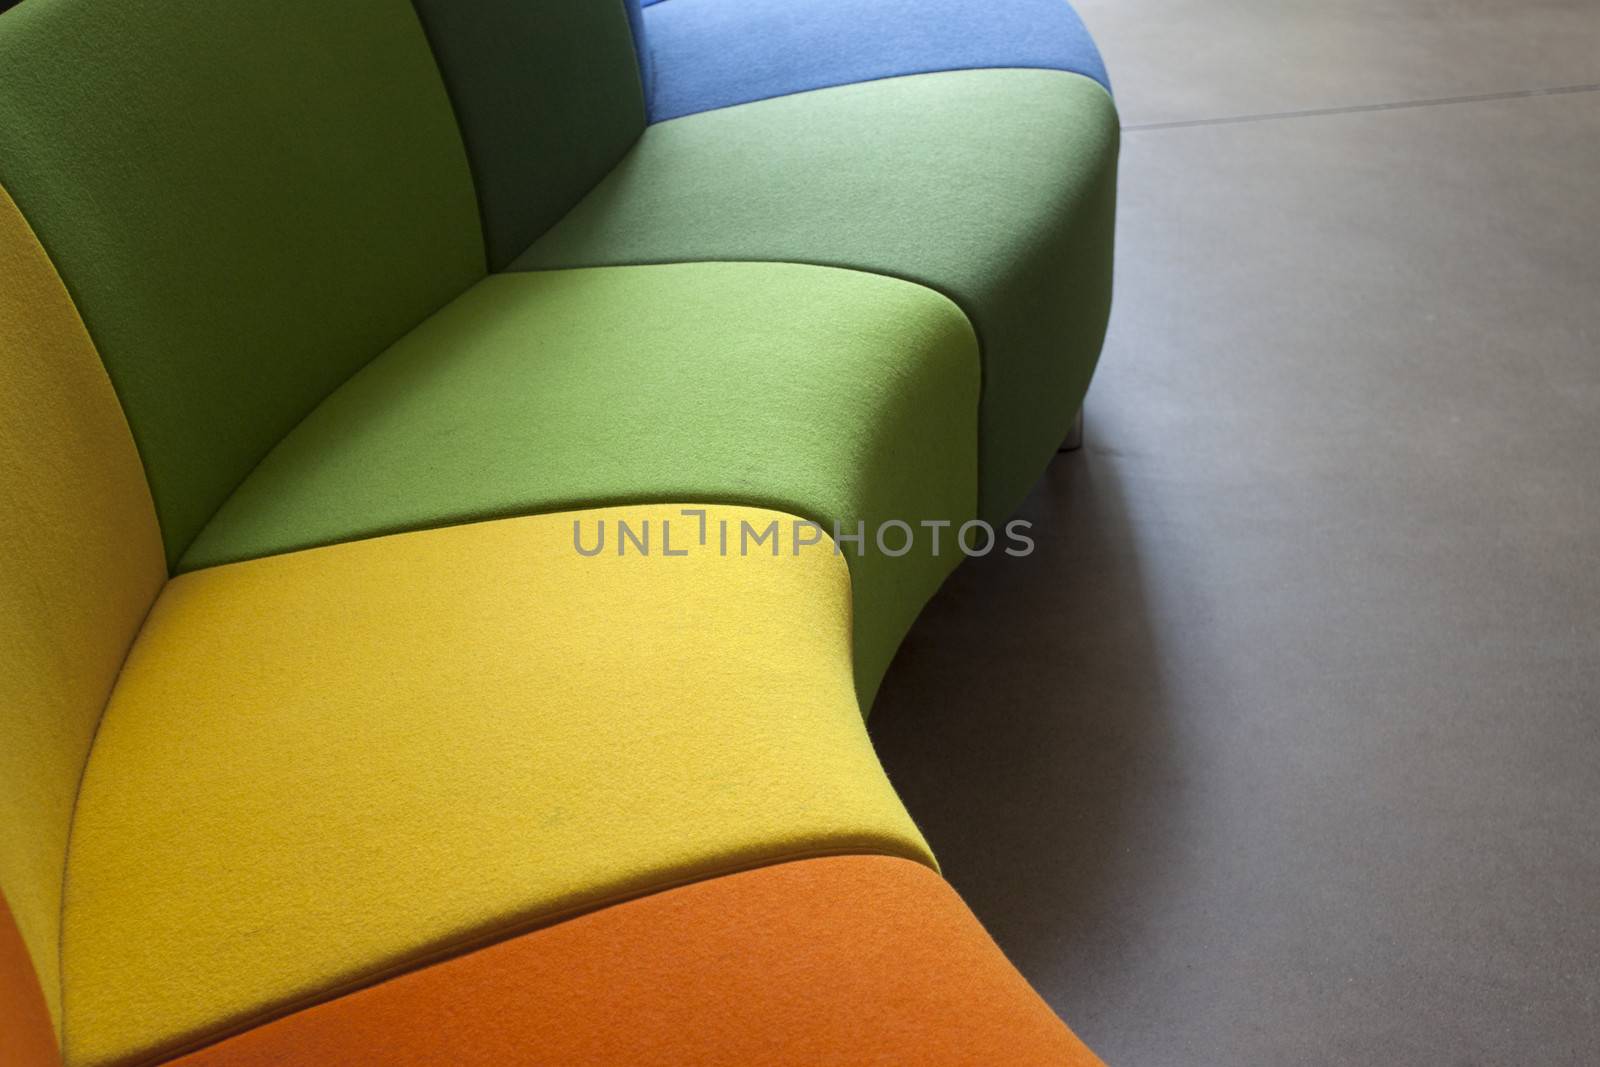 Detail of a curved sofa in green, orange and yellow